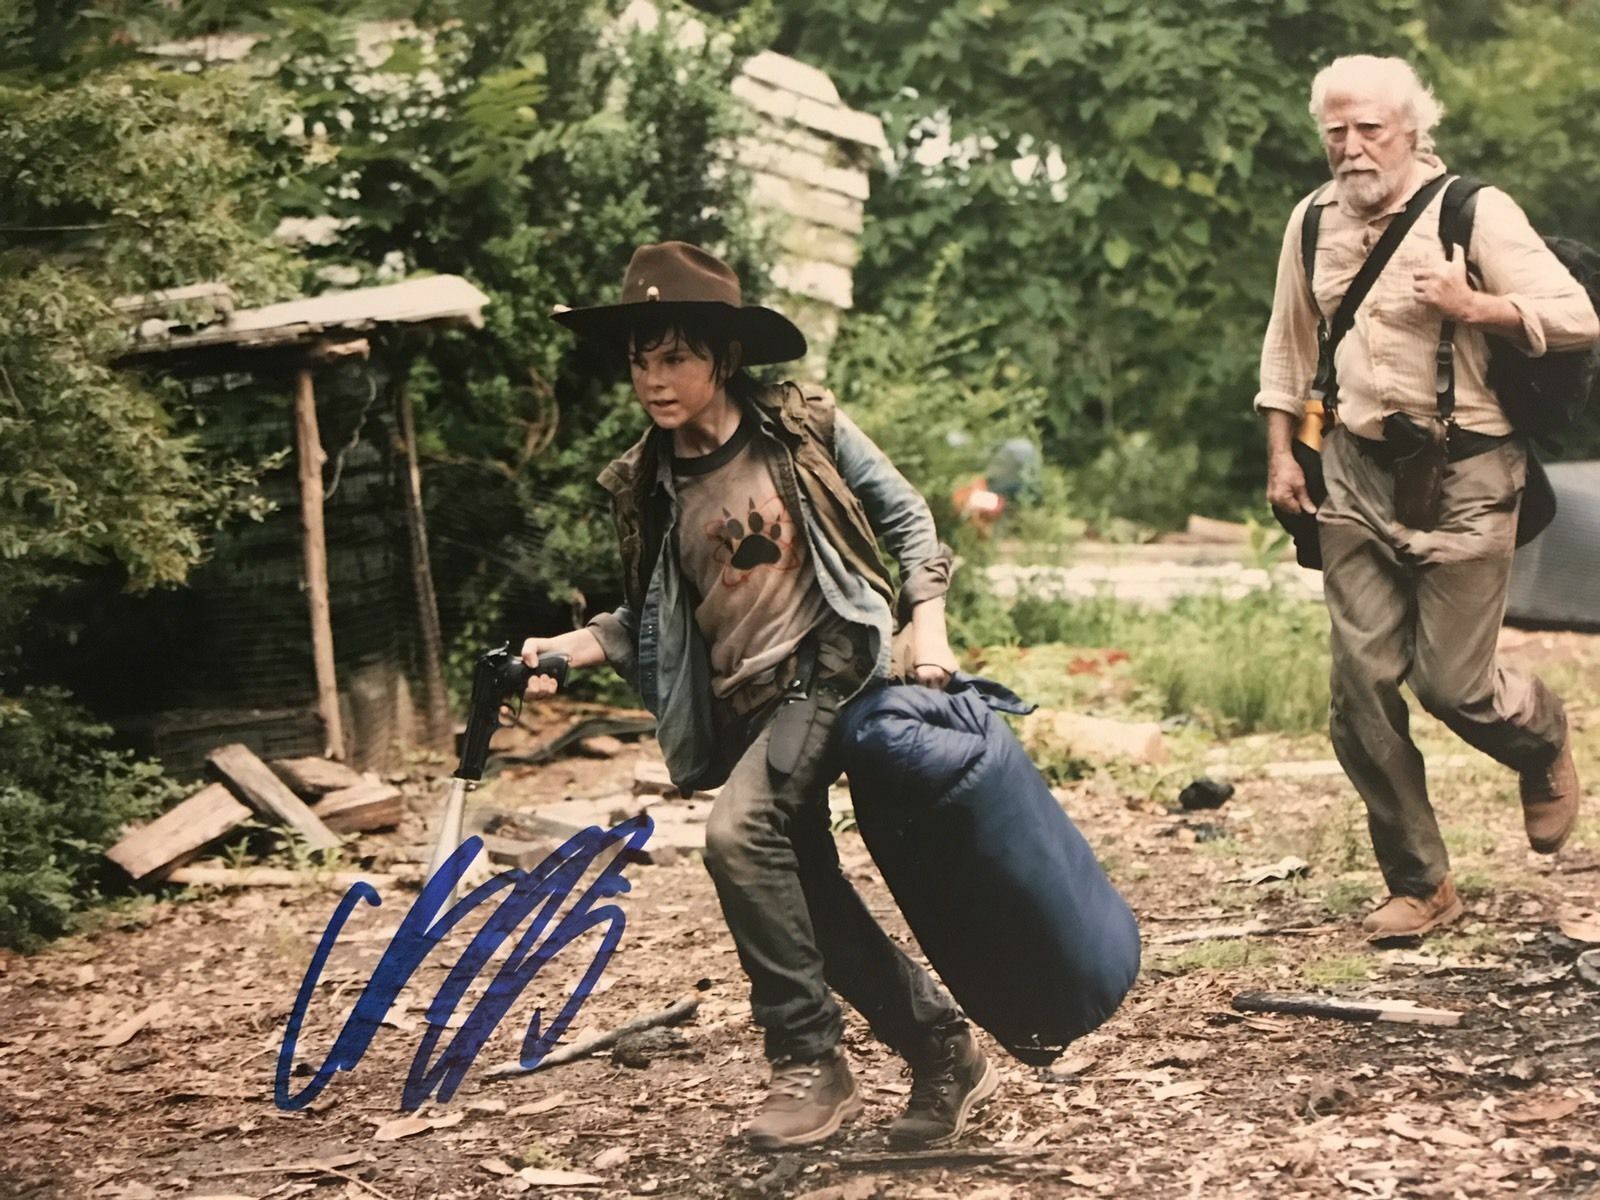 Chandler Riggs Autographed Signed 8x10 Photo Poster painting ( Walking Dead ) REPRINT